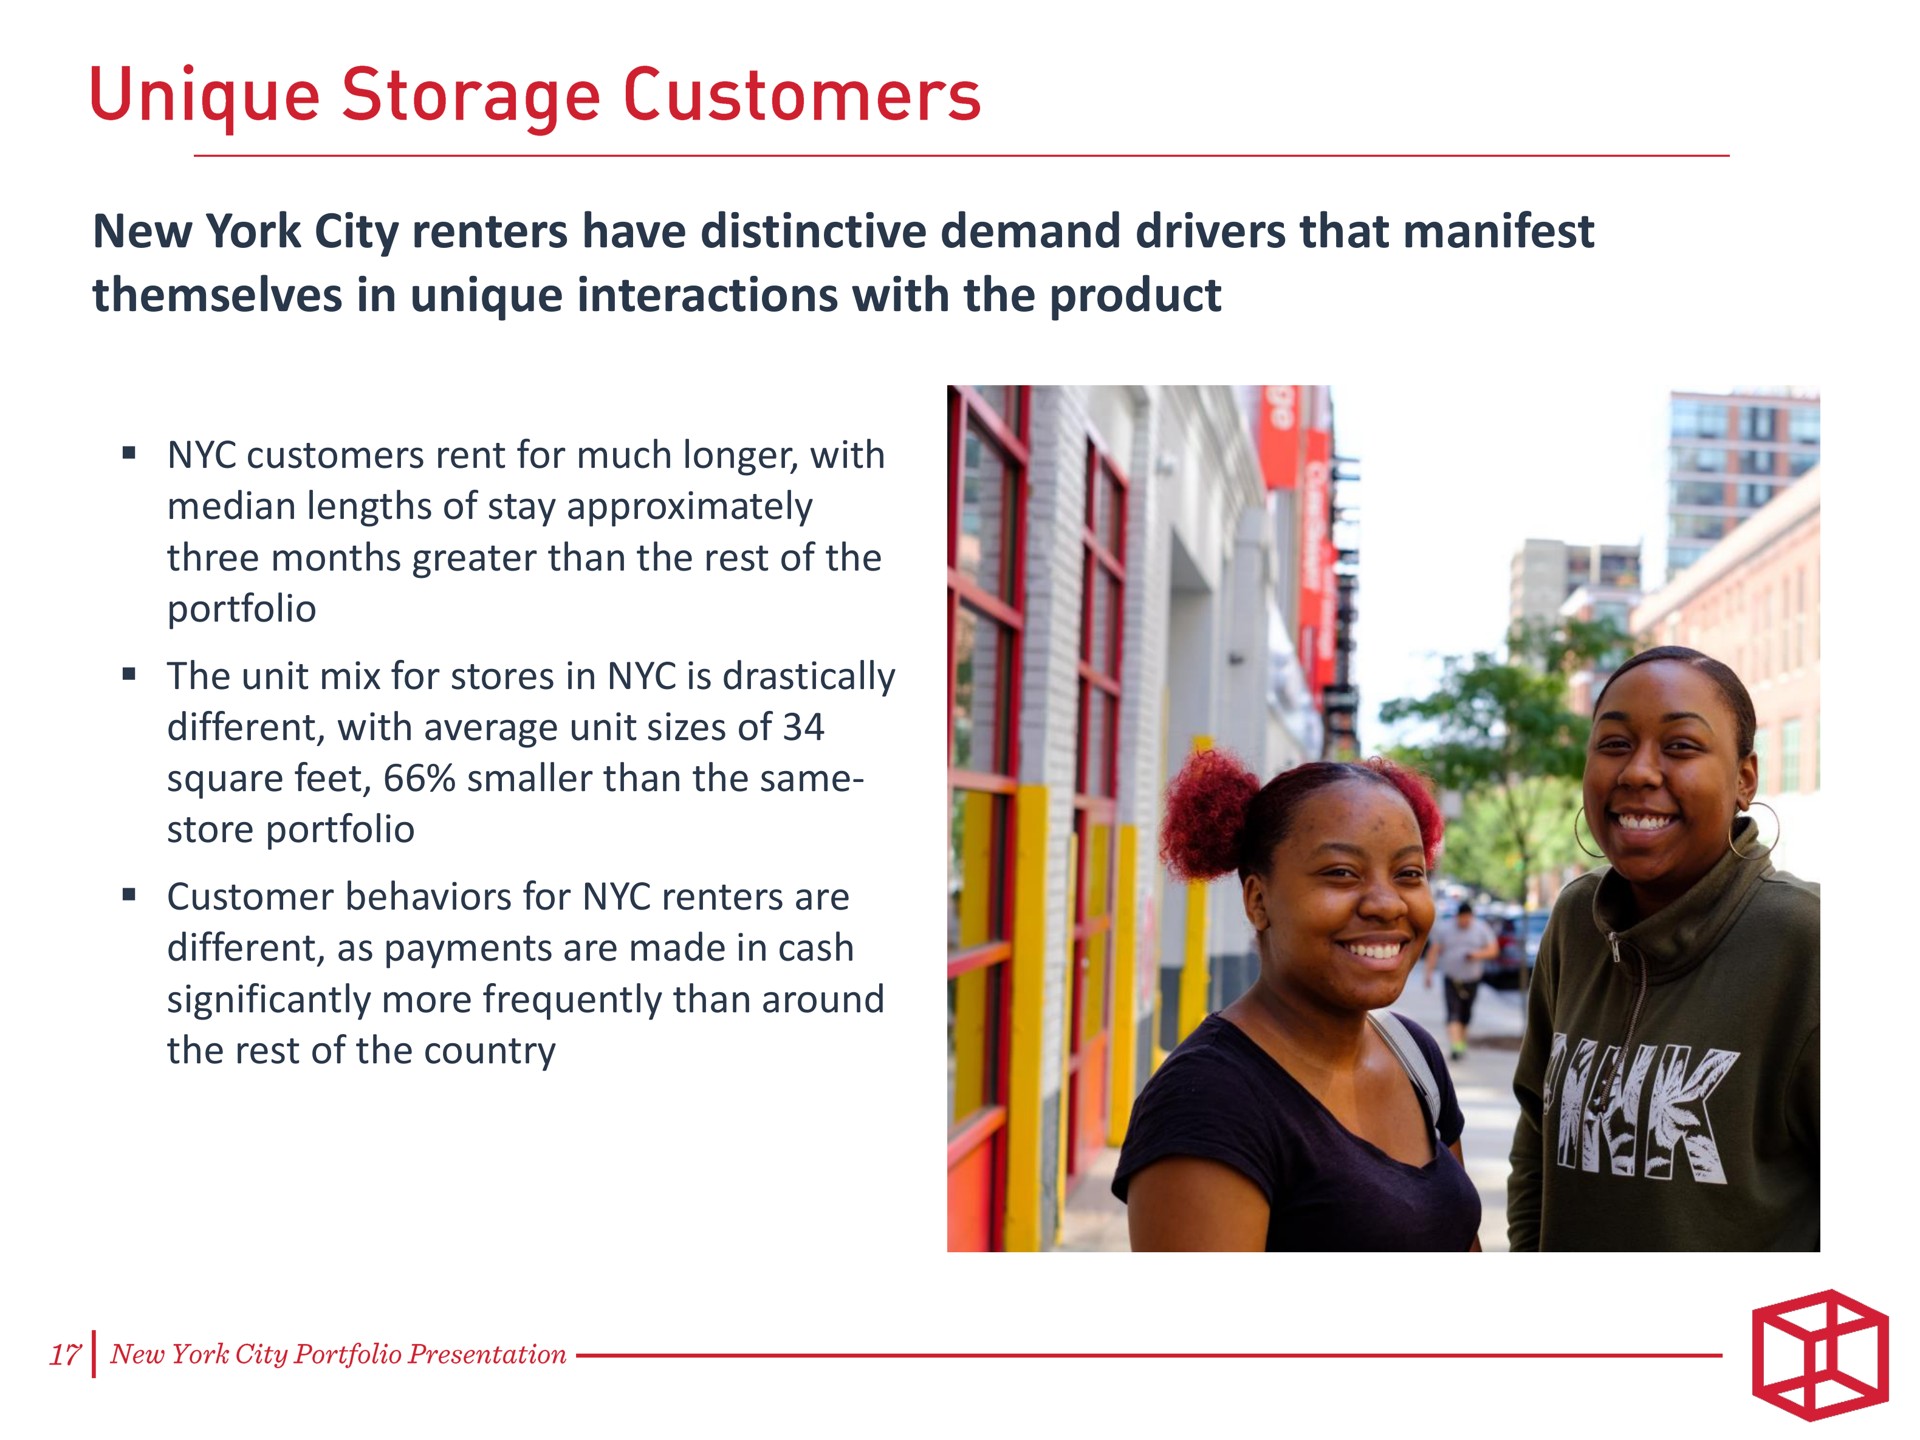 new york city renters have distinctive demand drivers that manifest themselves in unique interactions with the product storage customers | CubeSmart